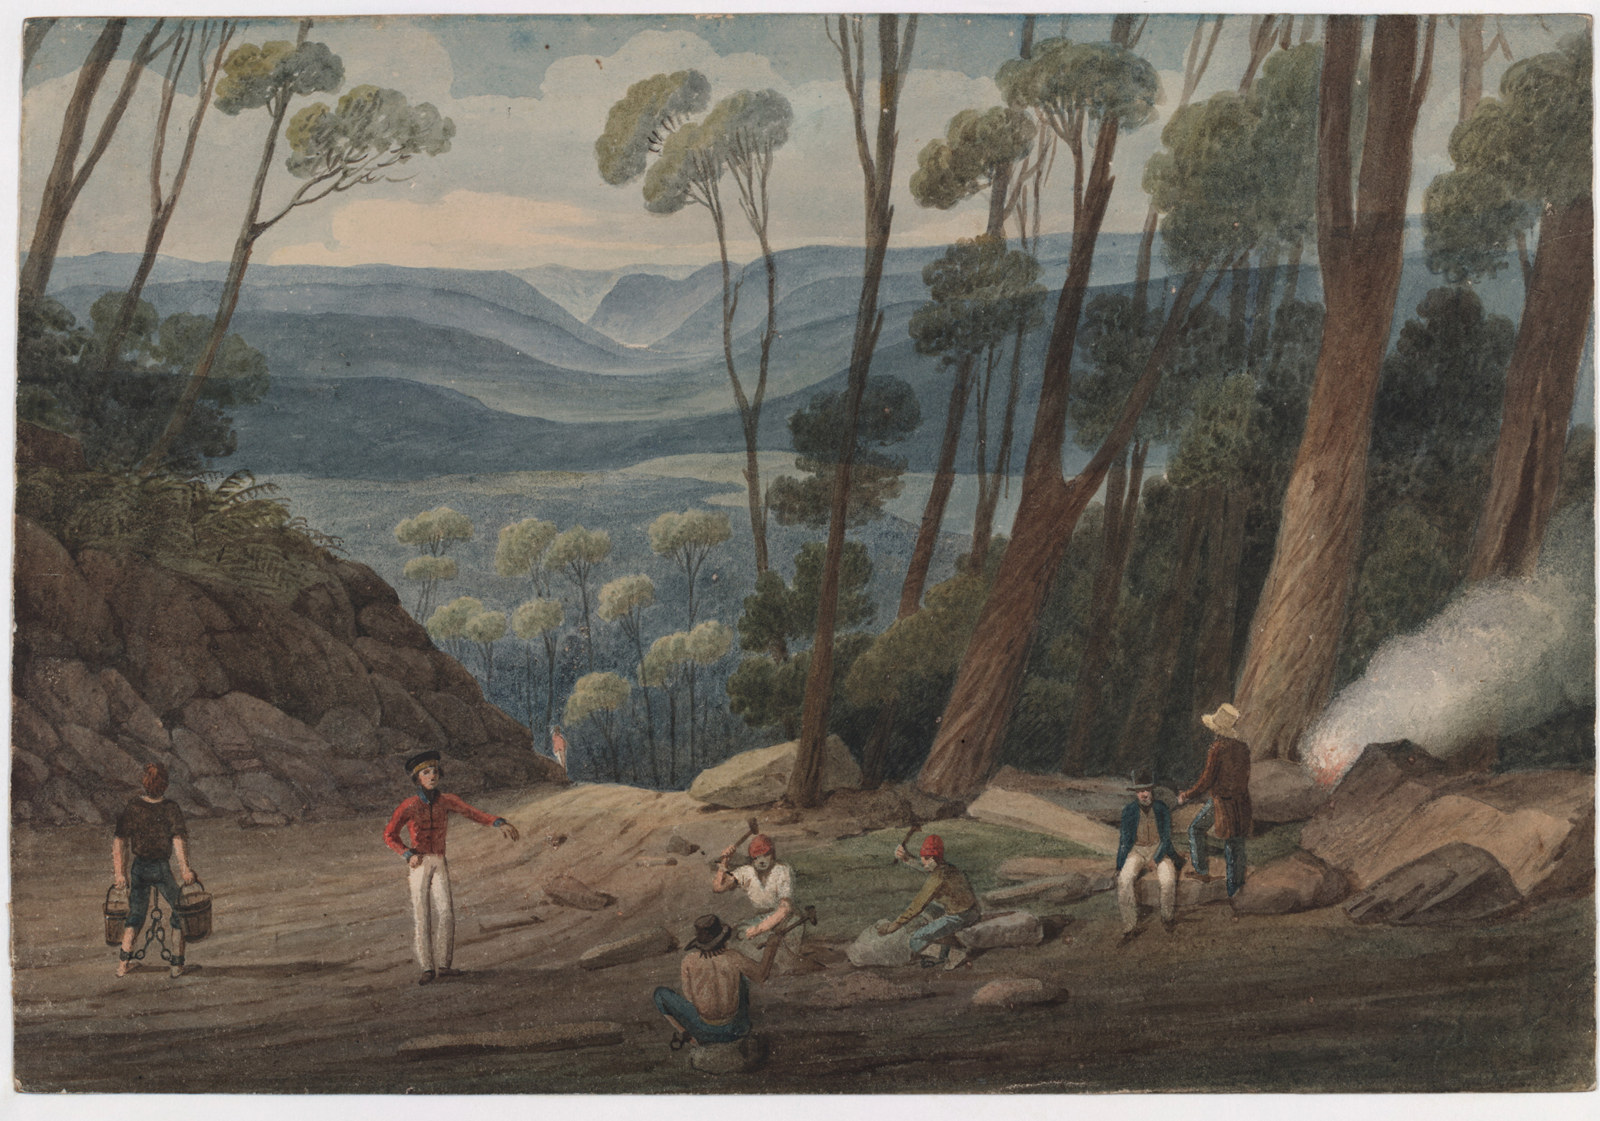 View from the summit of Mount York, looking towards Bathurst Plains, convicts breaking stones, N.S. Wales 